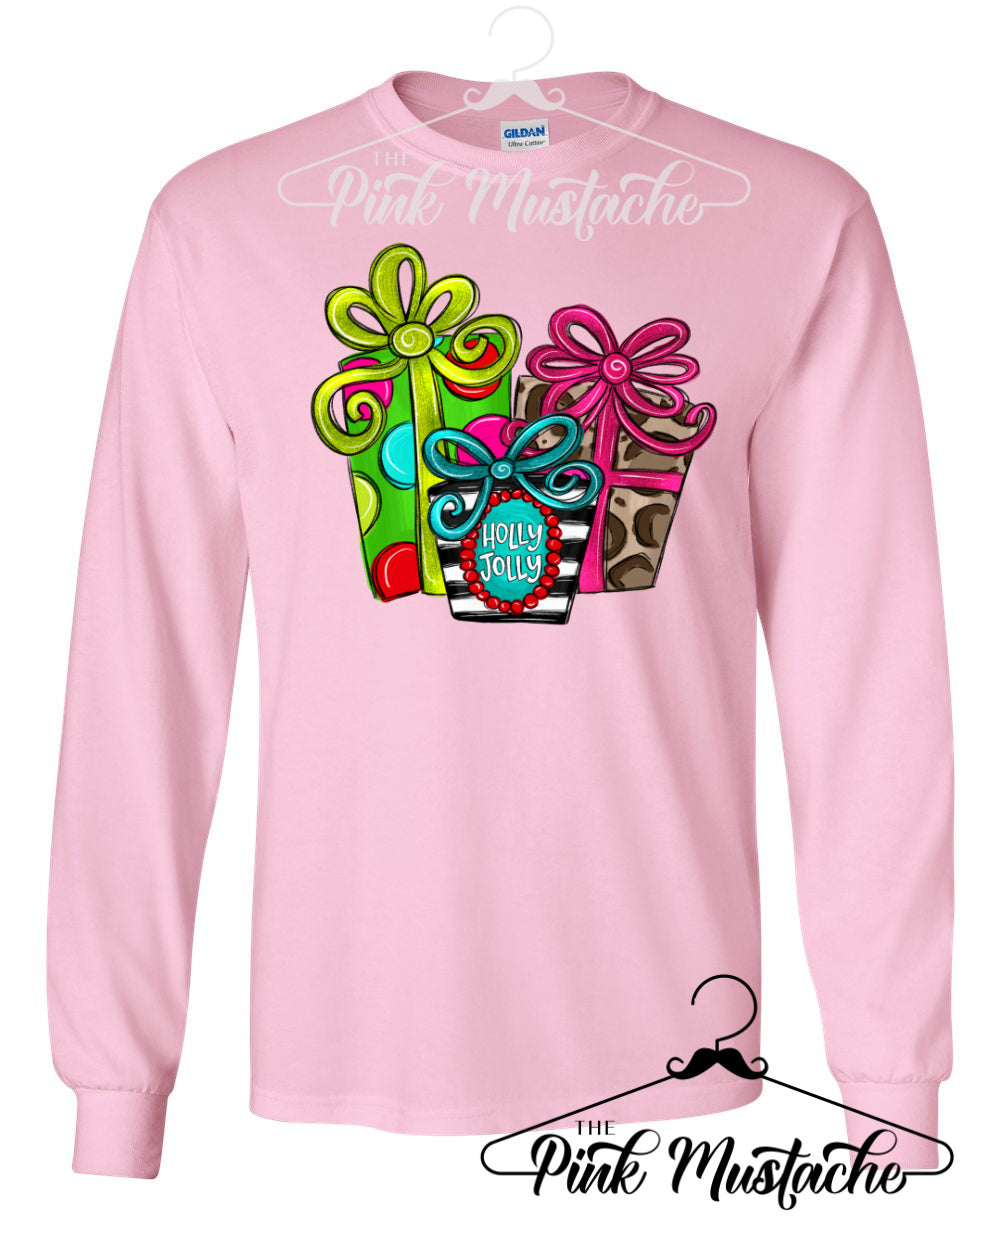 Long Sleeve Pink Holly Jolly Presents Christmas Tee / Toddler, Youth, and Adult Sizes/ Softstyle Tee / Christmas Shirt